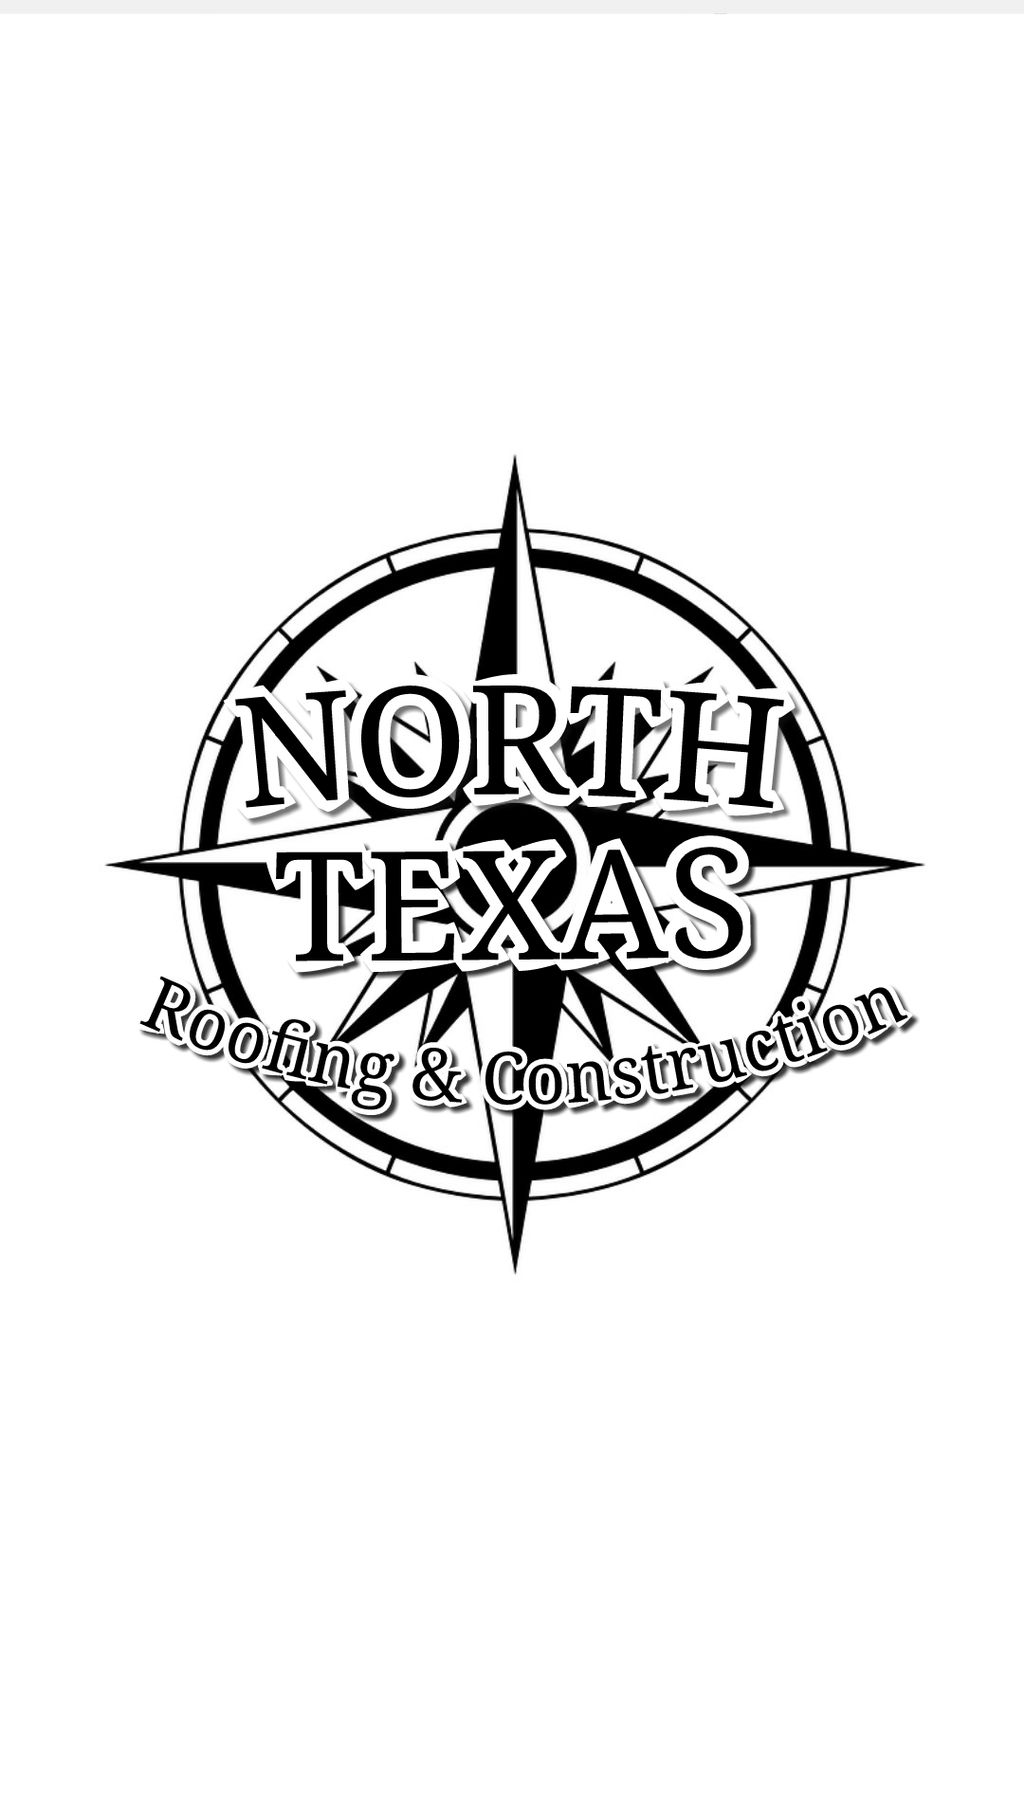 North Texas Roofing & Construction